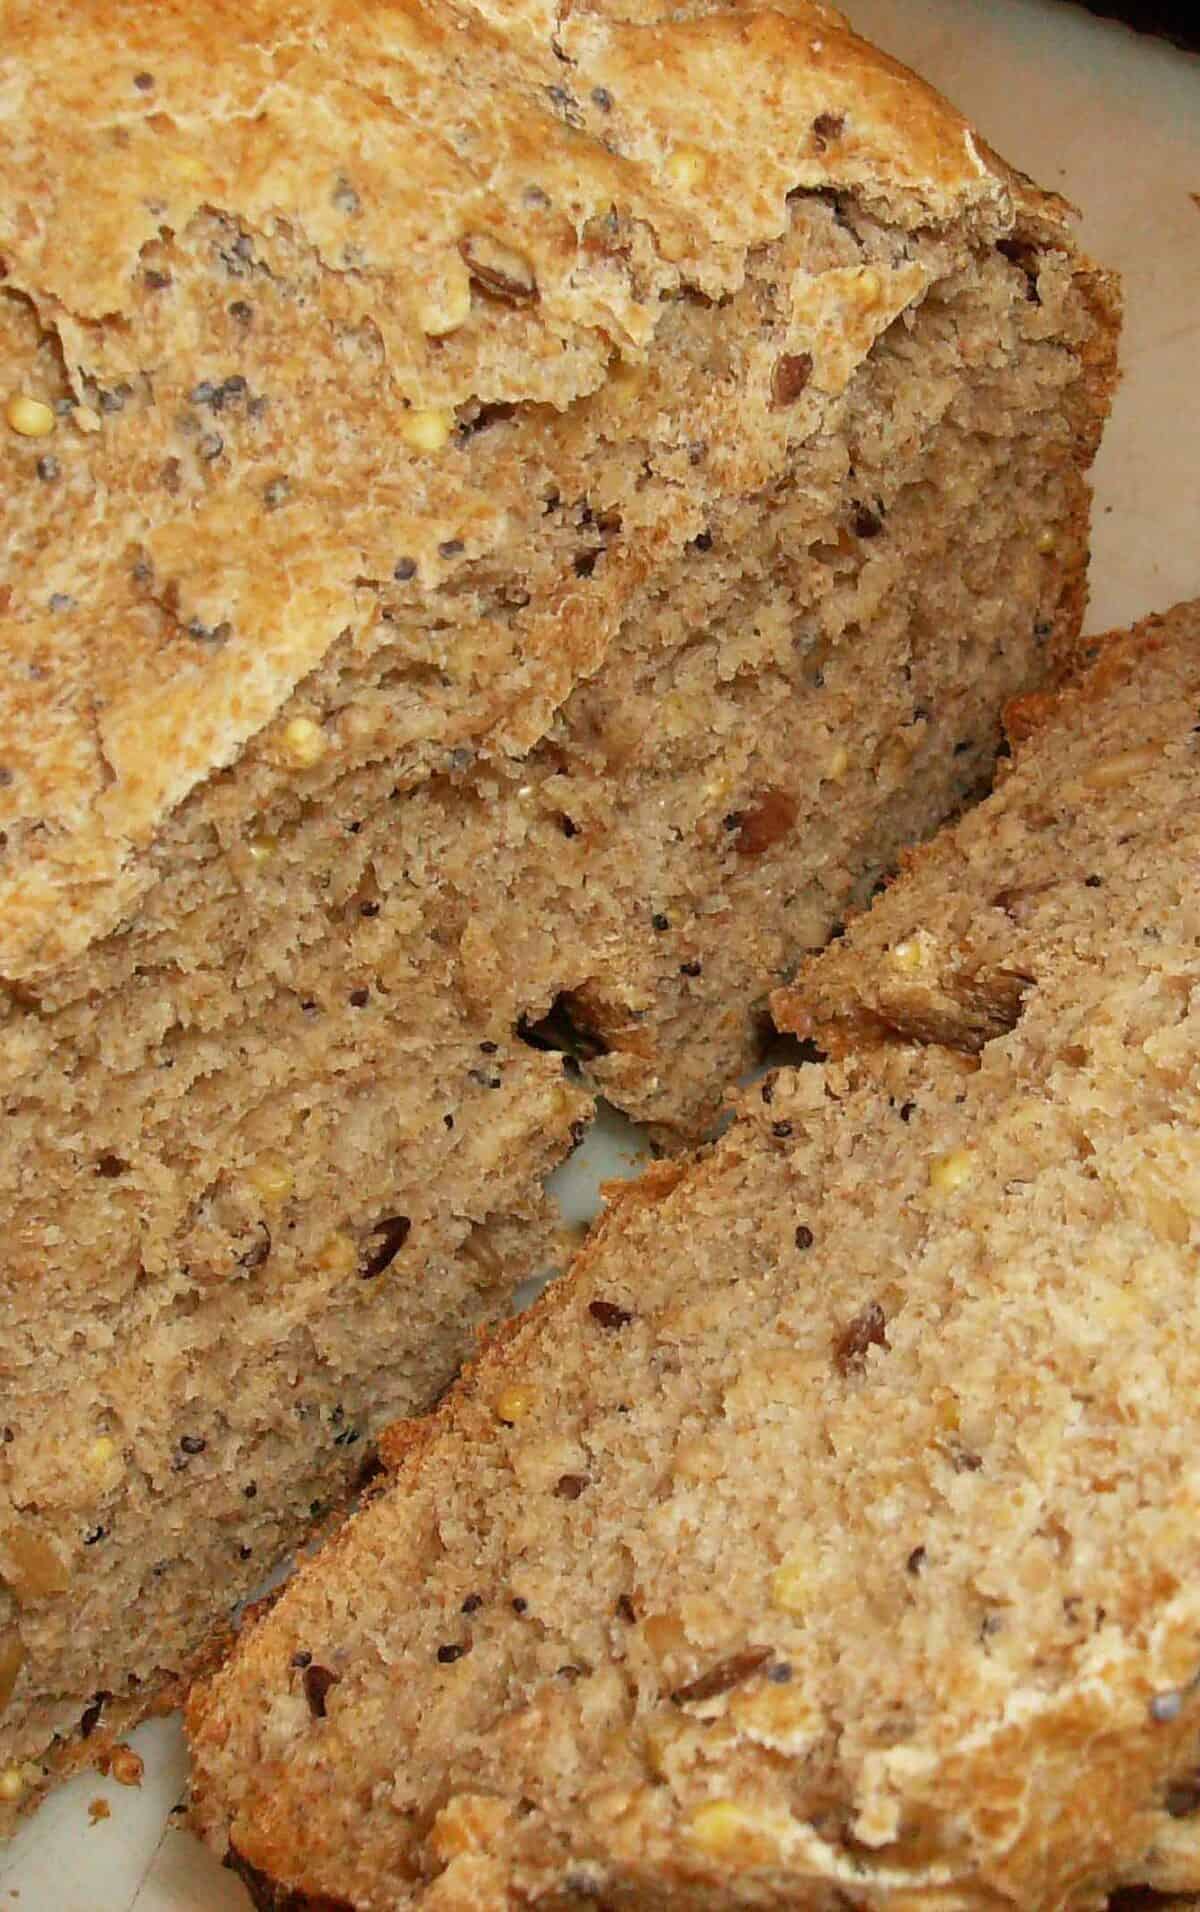  A wholesome blend of grains perfect for a rustic loaf